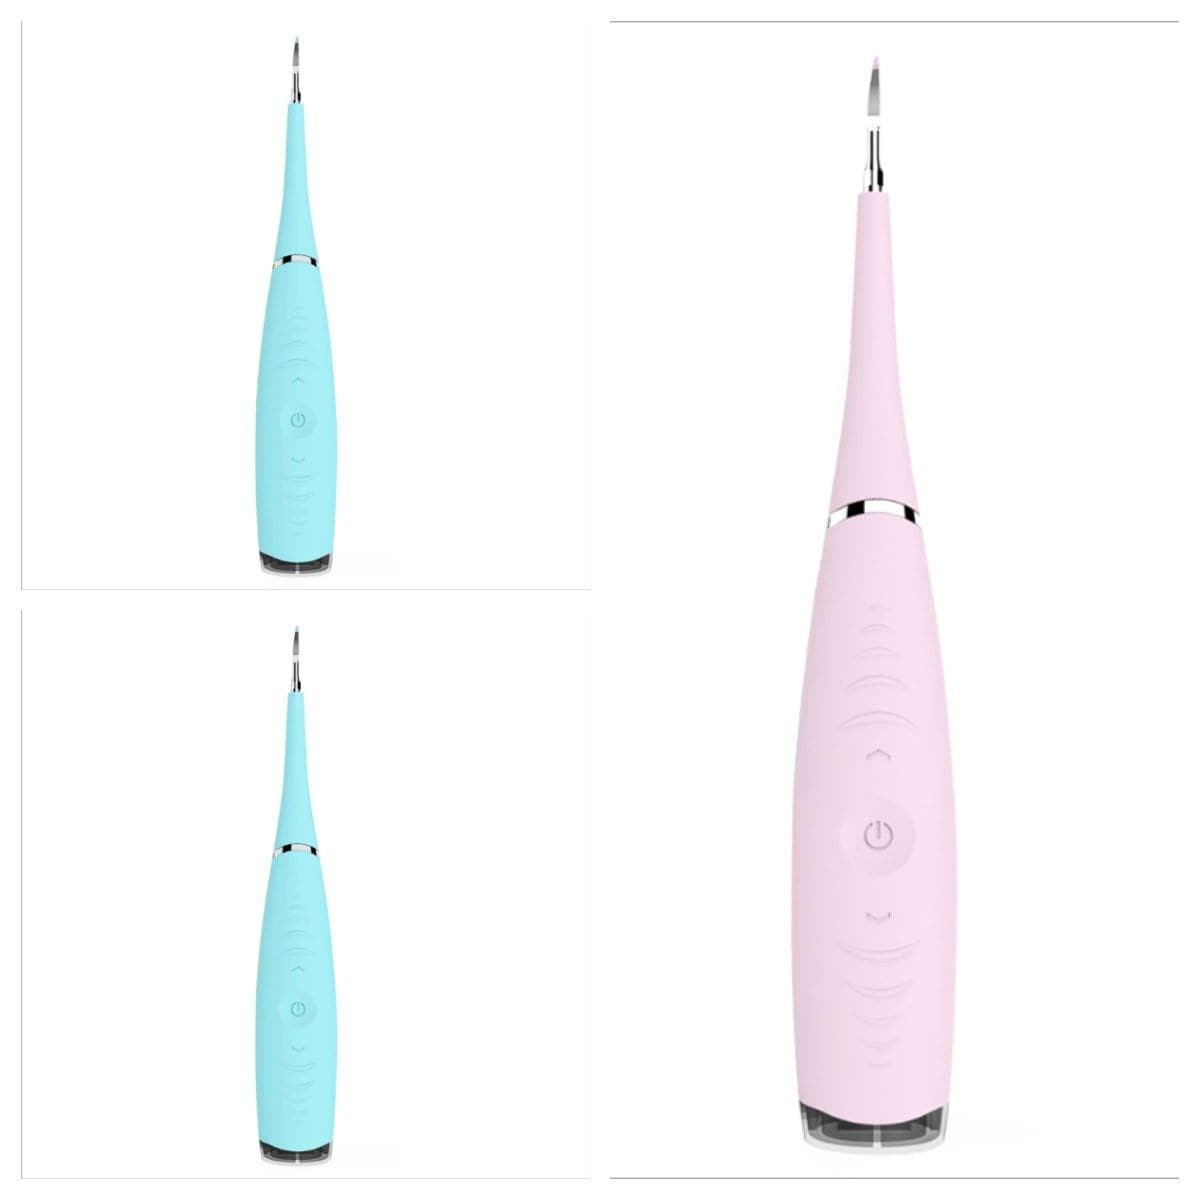 ezy2find tooth scaler 1Pink 2Blue / 3pc Portable Electric Sonic Dental Scaler Tooth Calculus Remover Tooth Stains Tartar Tool Dentist Whiten Teeth Health Hygiene white